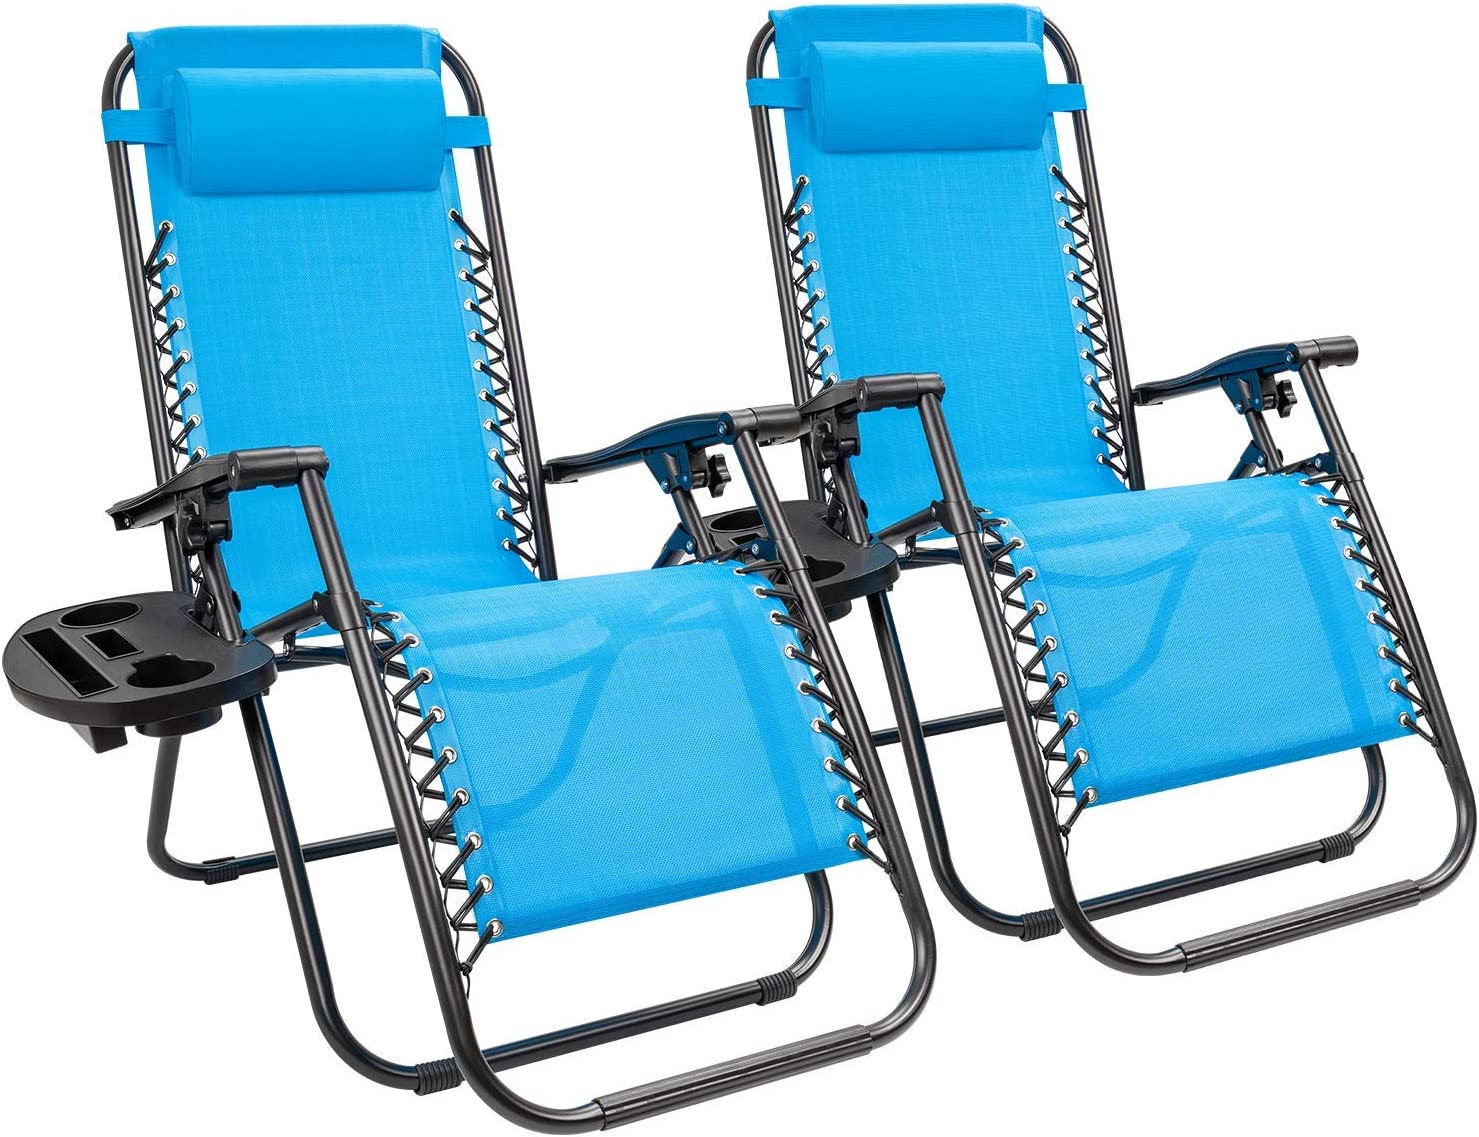 Kemon Lumbar Supporting Easy Carry Zero Gravity Chairs, 2-Piece